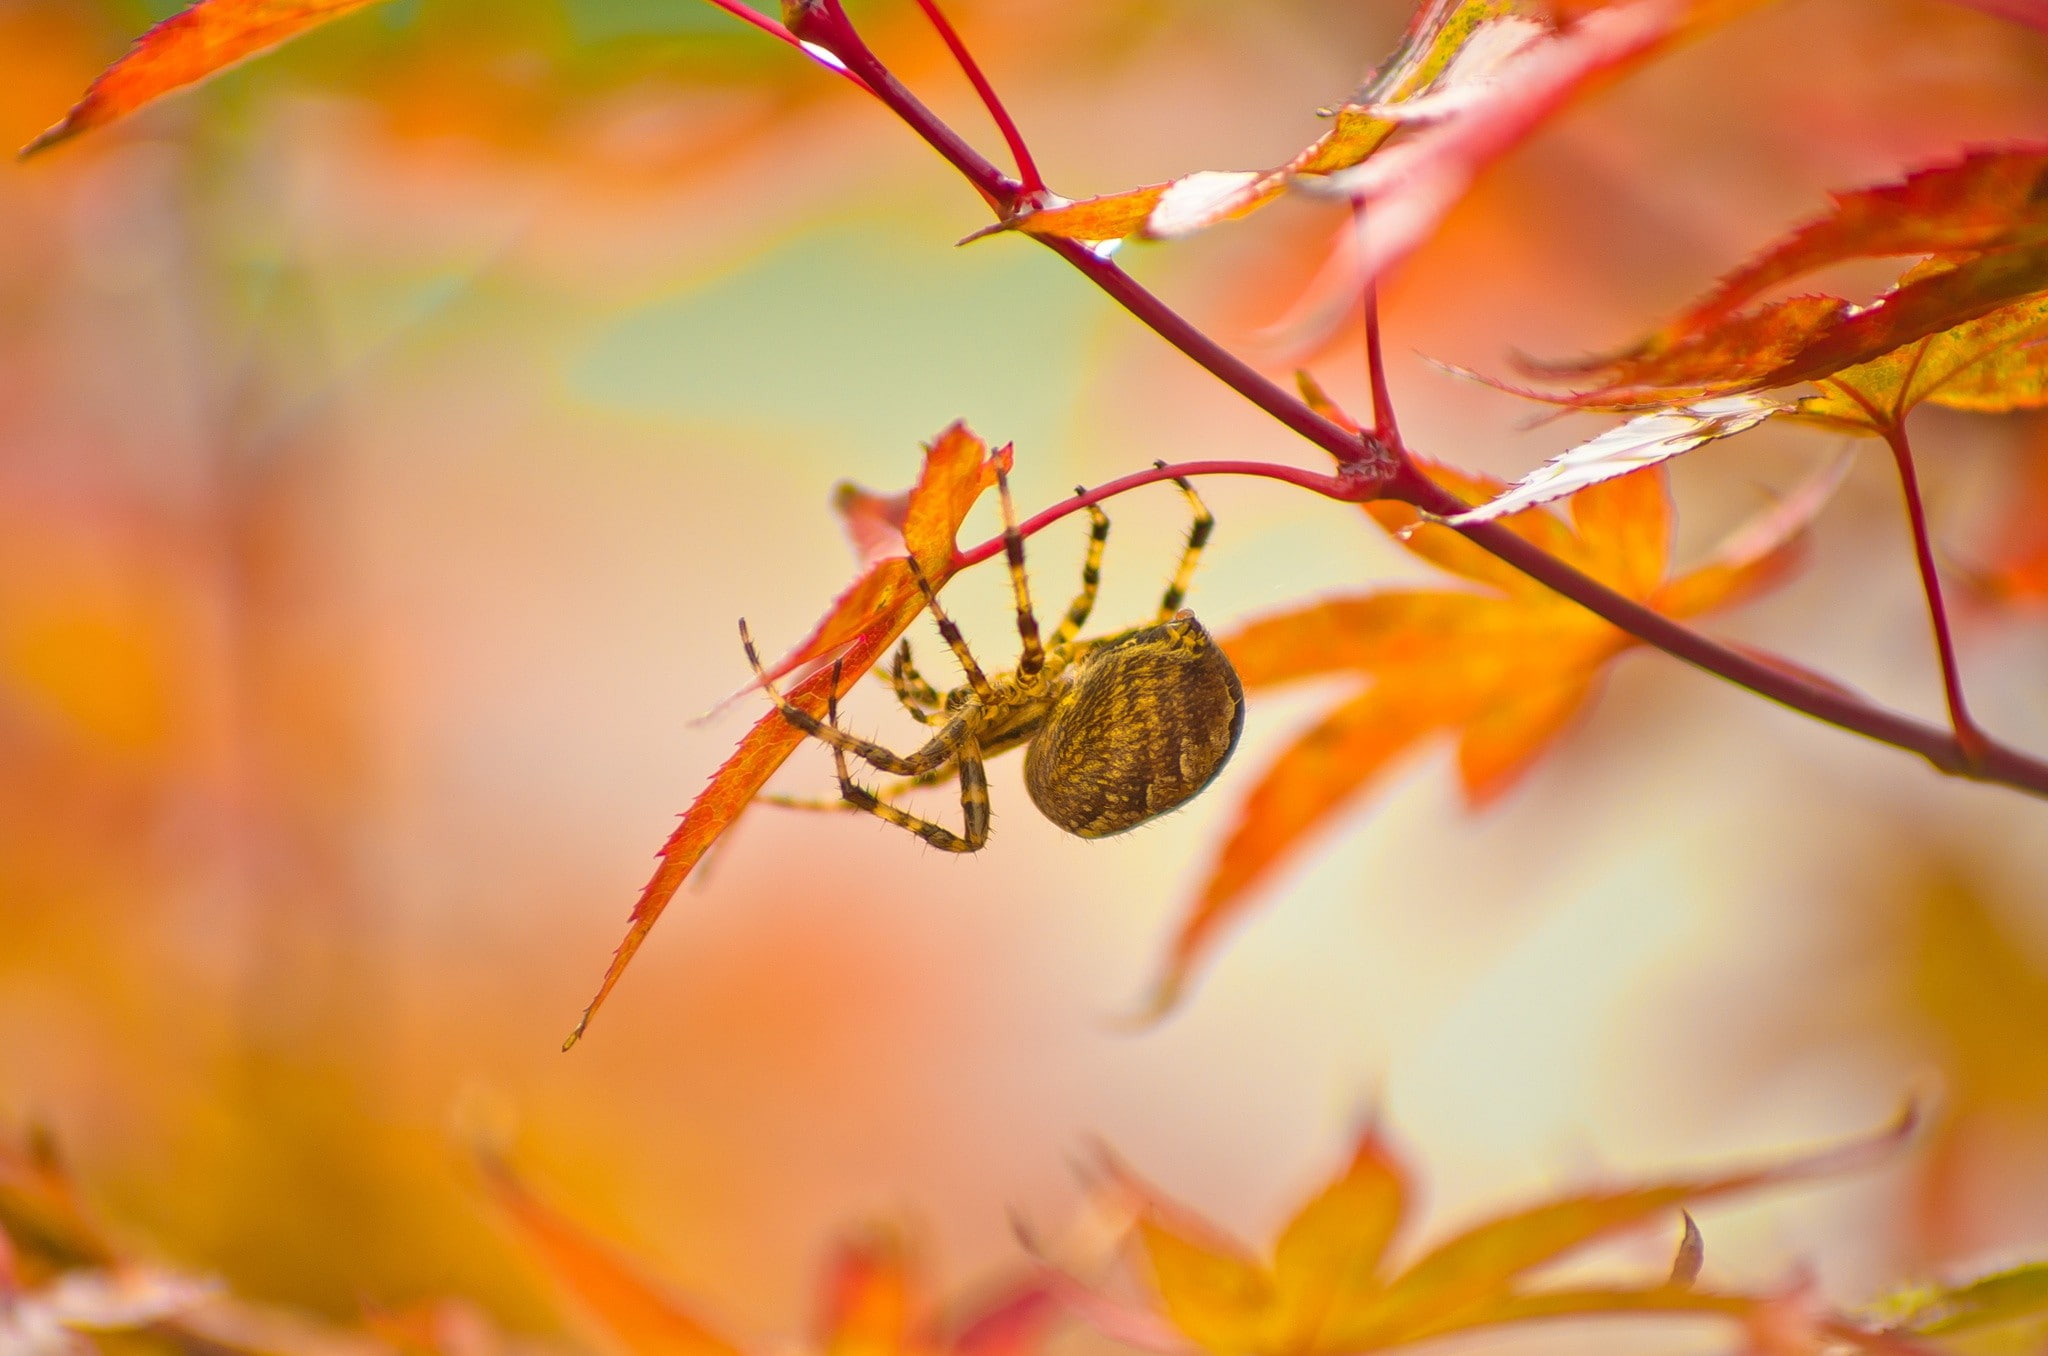 photography, nature, macro, spider, plants, leaves, fall, animal themes